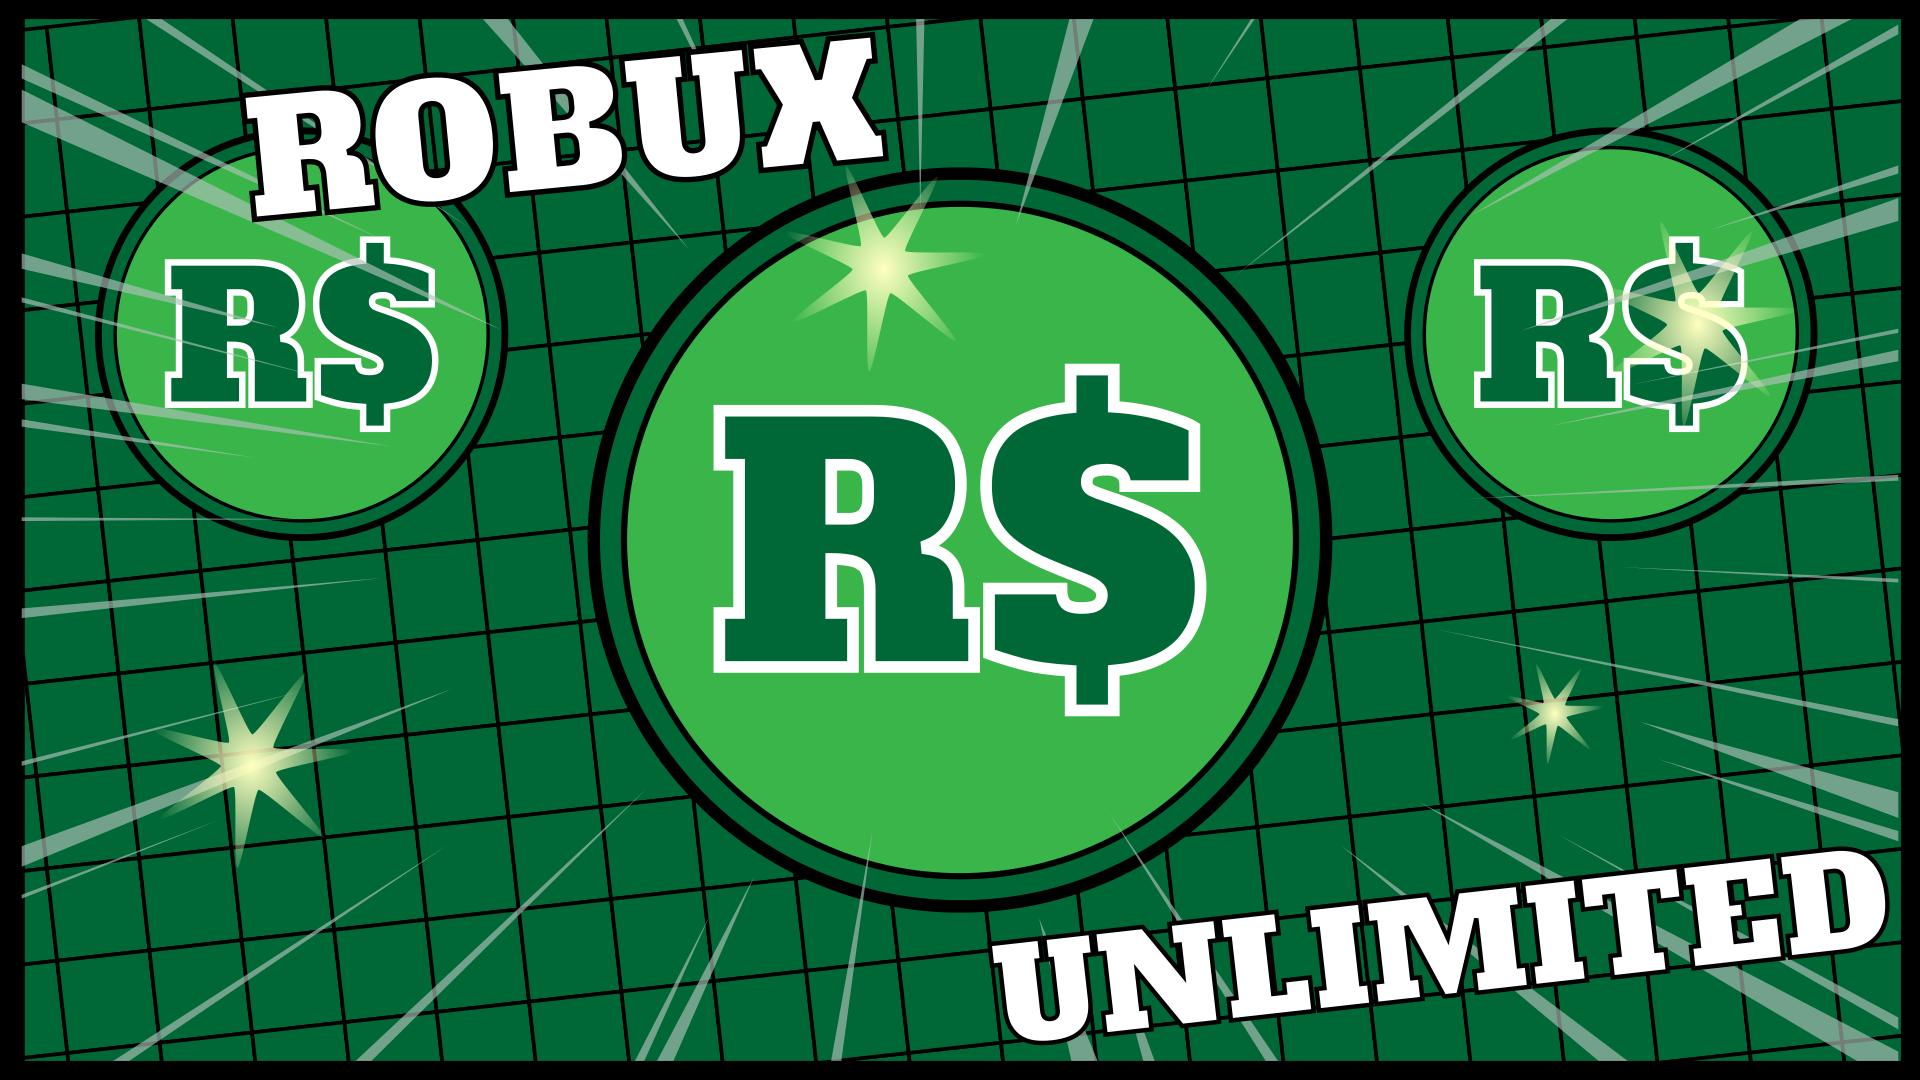 Free Robux Pro Guide Best Tix Booster 2019 For Android Apk - roblox robux infinito download apk 2019